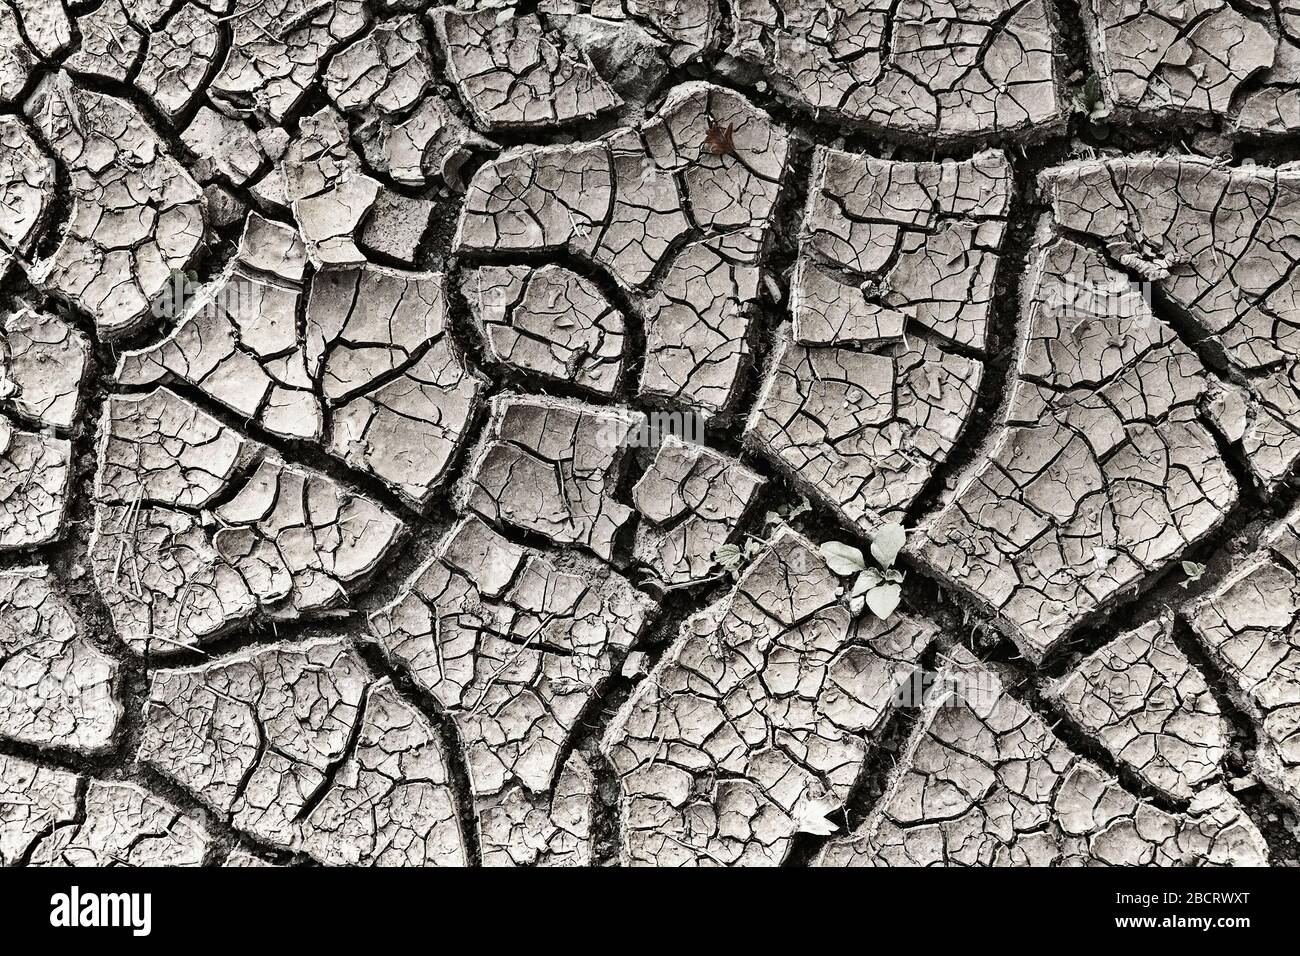 cracked soil surface after drought, image taken in middle summer Stock Photo